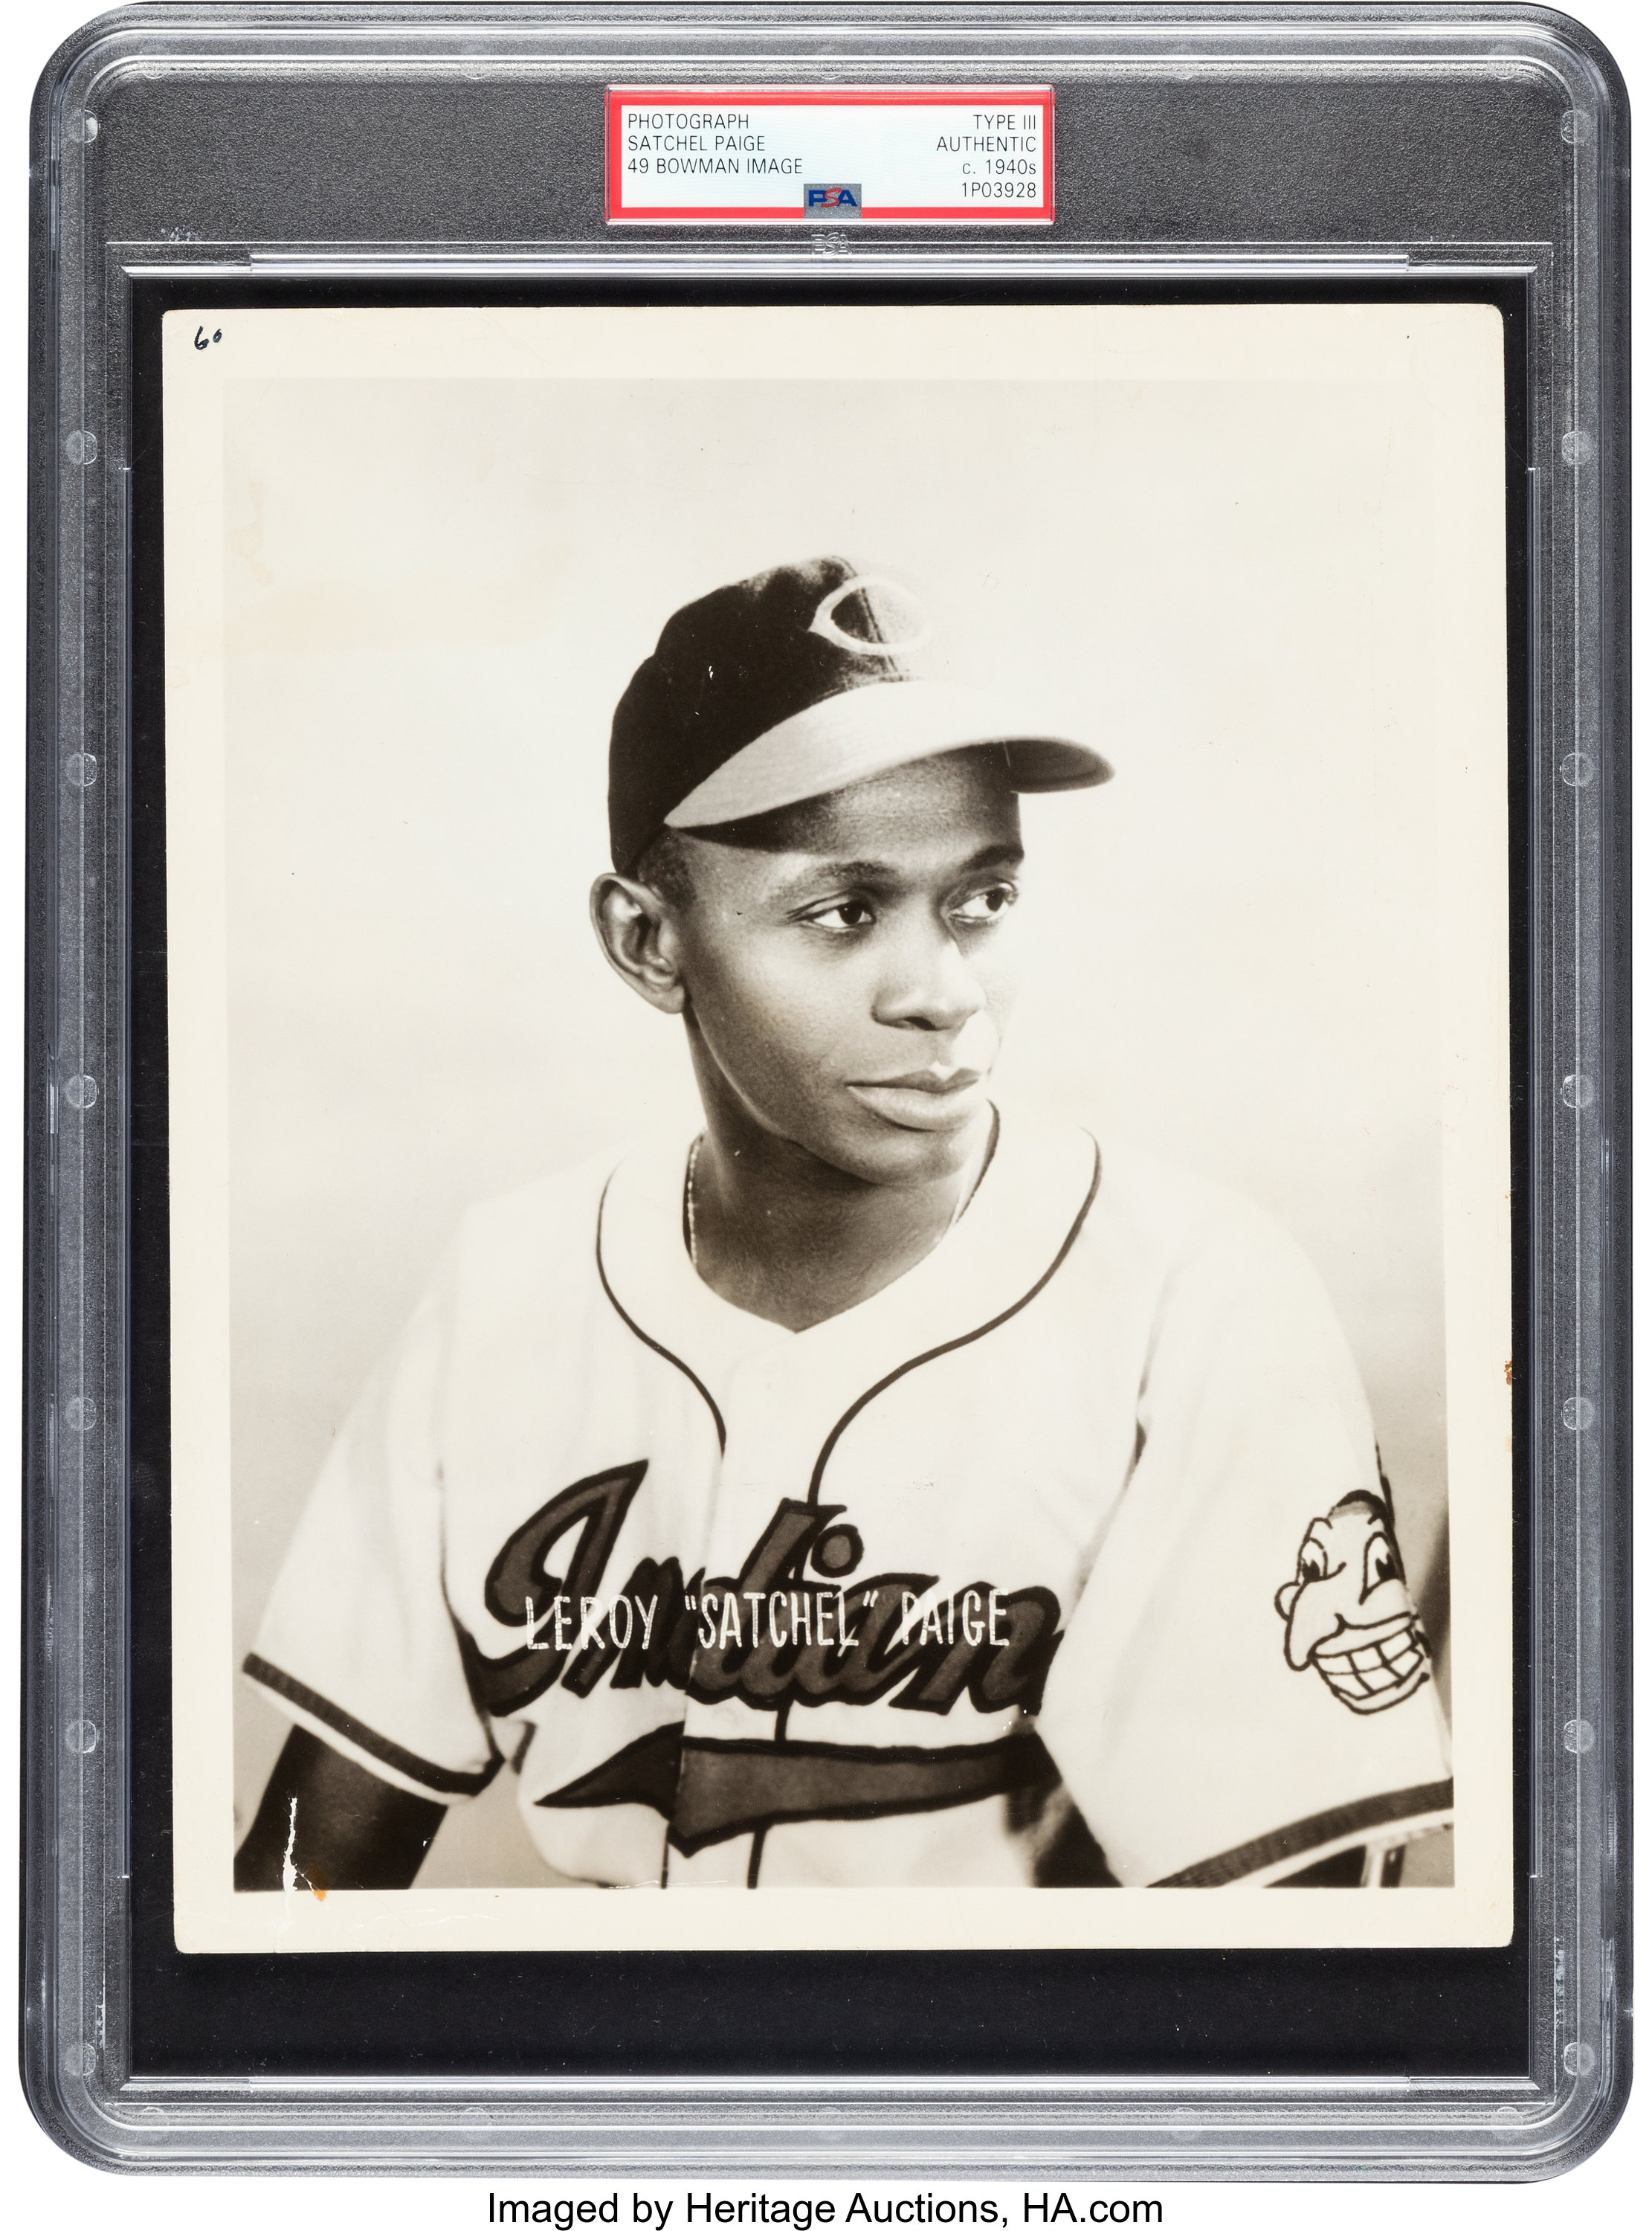 1949 rookie card of Indians pitcher Satchel Paige sells at auction 